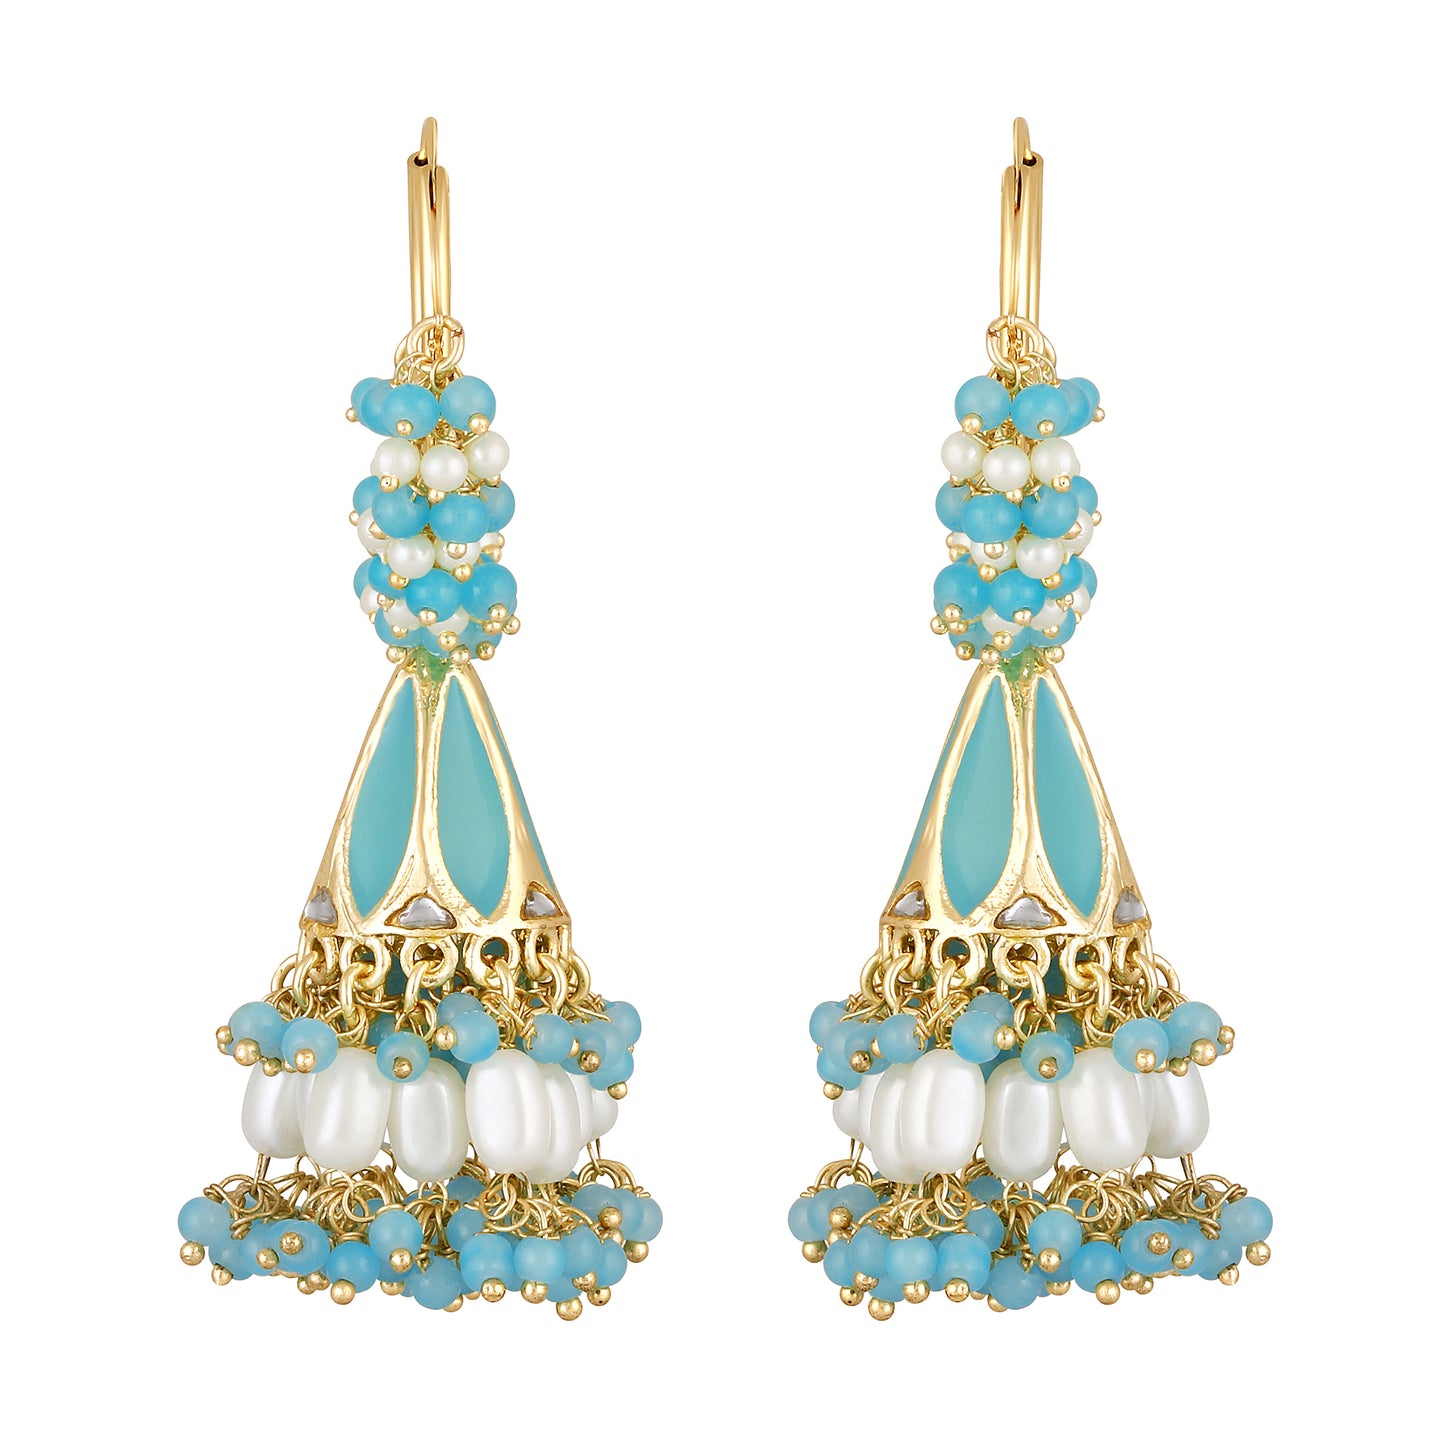 Bdiva 18K Gold Plated Turquoise Chandbali Earrings with Semi Cultured Pearls.